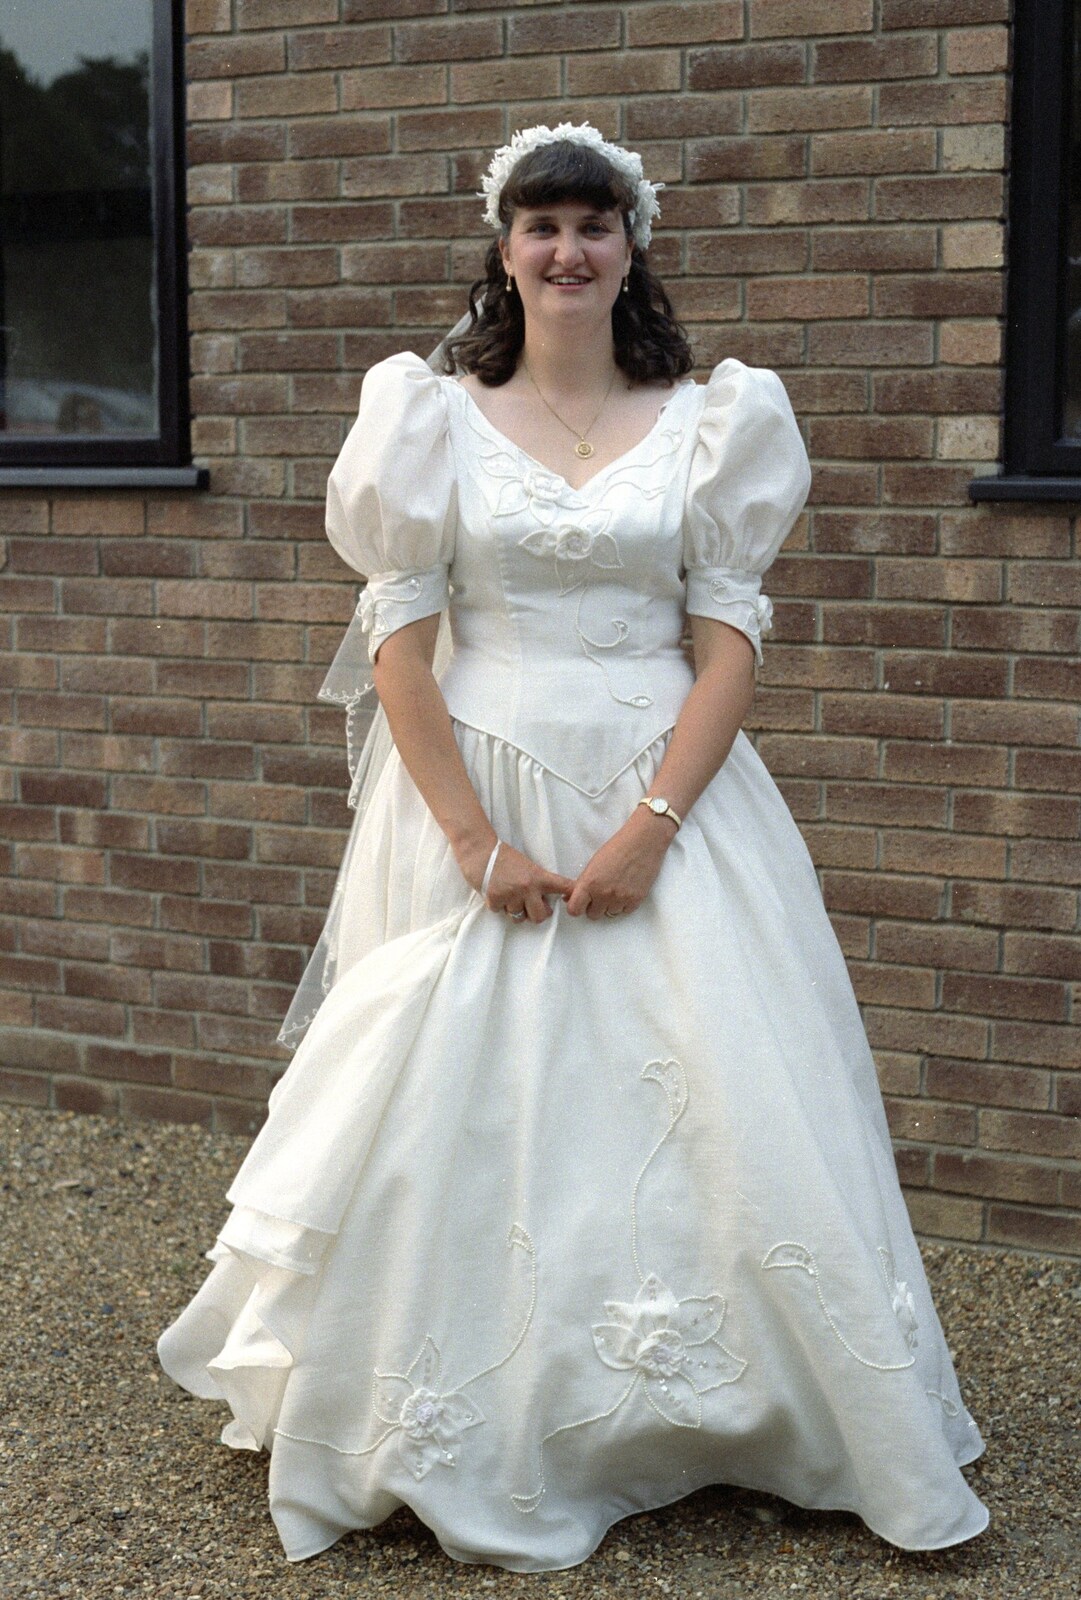 Jane poses for a photo from Tone's Wedding, Mundford, Norfolk - 27th August 1994